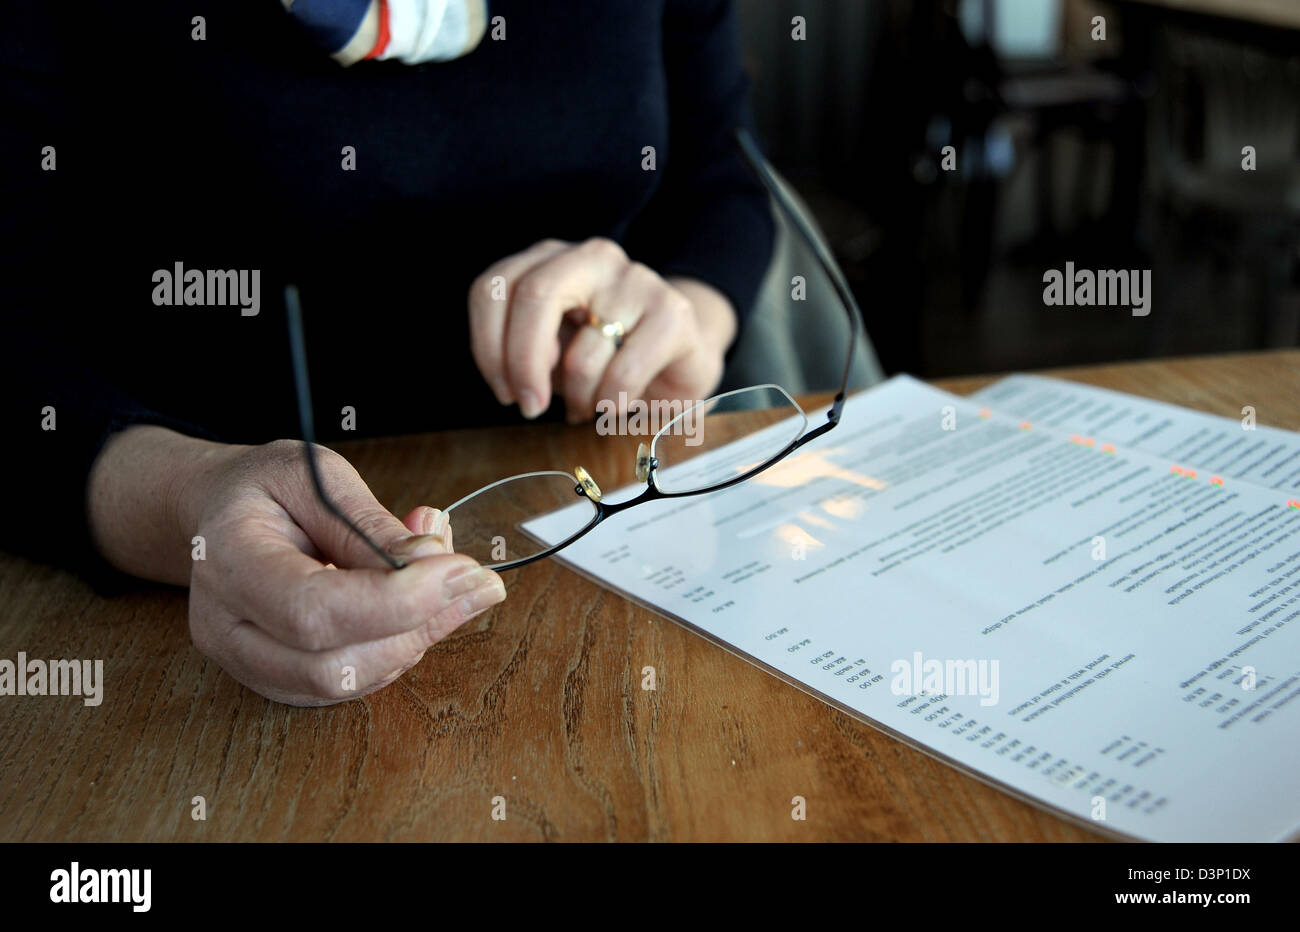 Woman holding pair of spectacles in hand at table for reading a menu Stock Photo